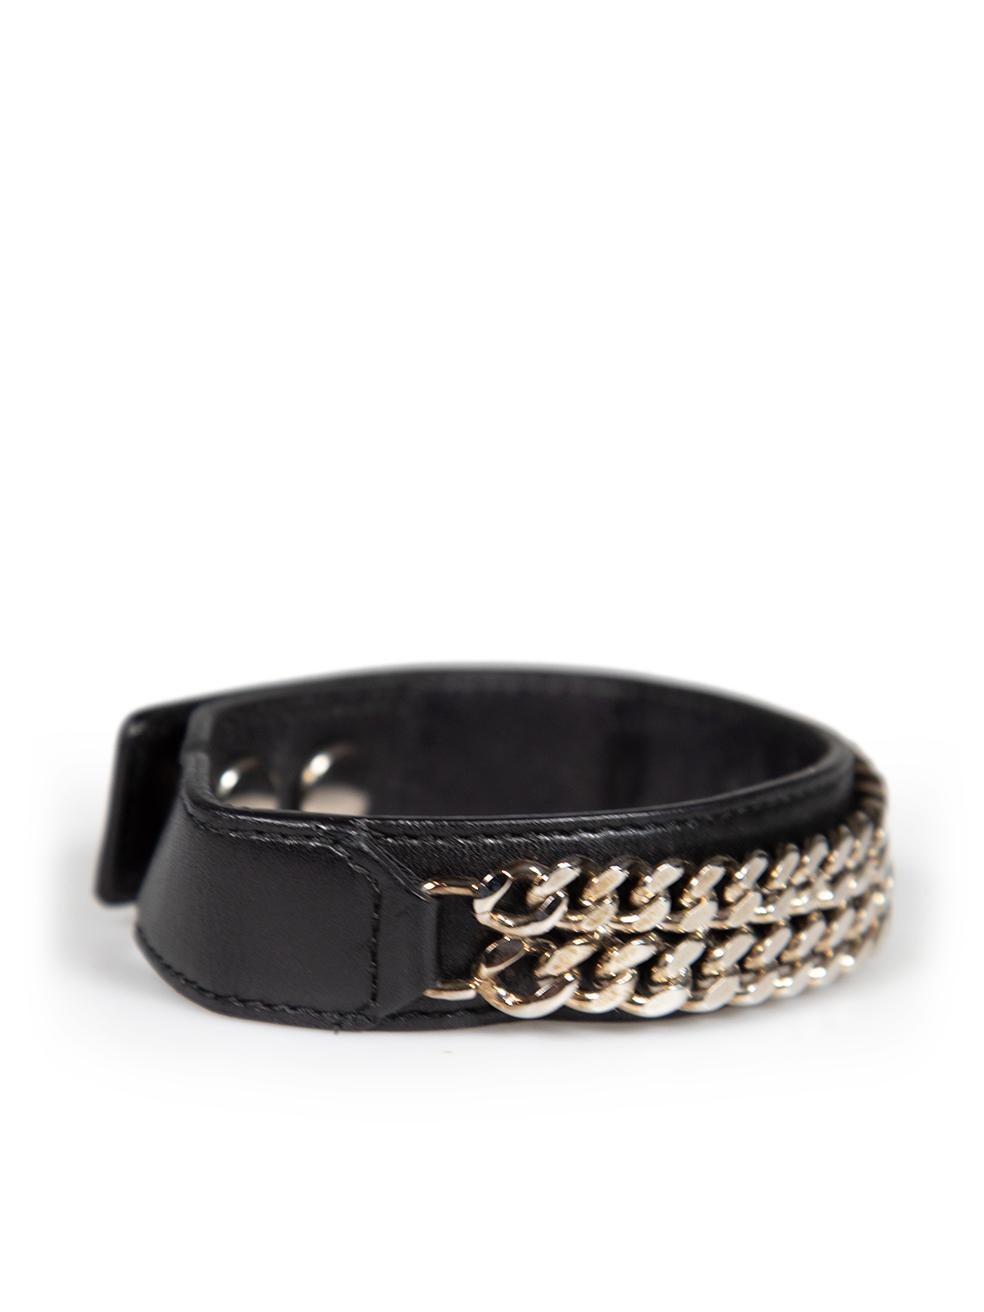 Saint Laurent Black Leather Silver Chain Bracelet In Excellent Condition For Sale In London, GB